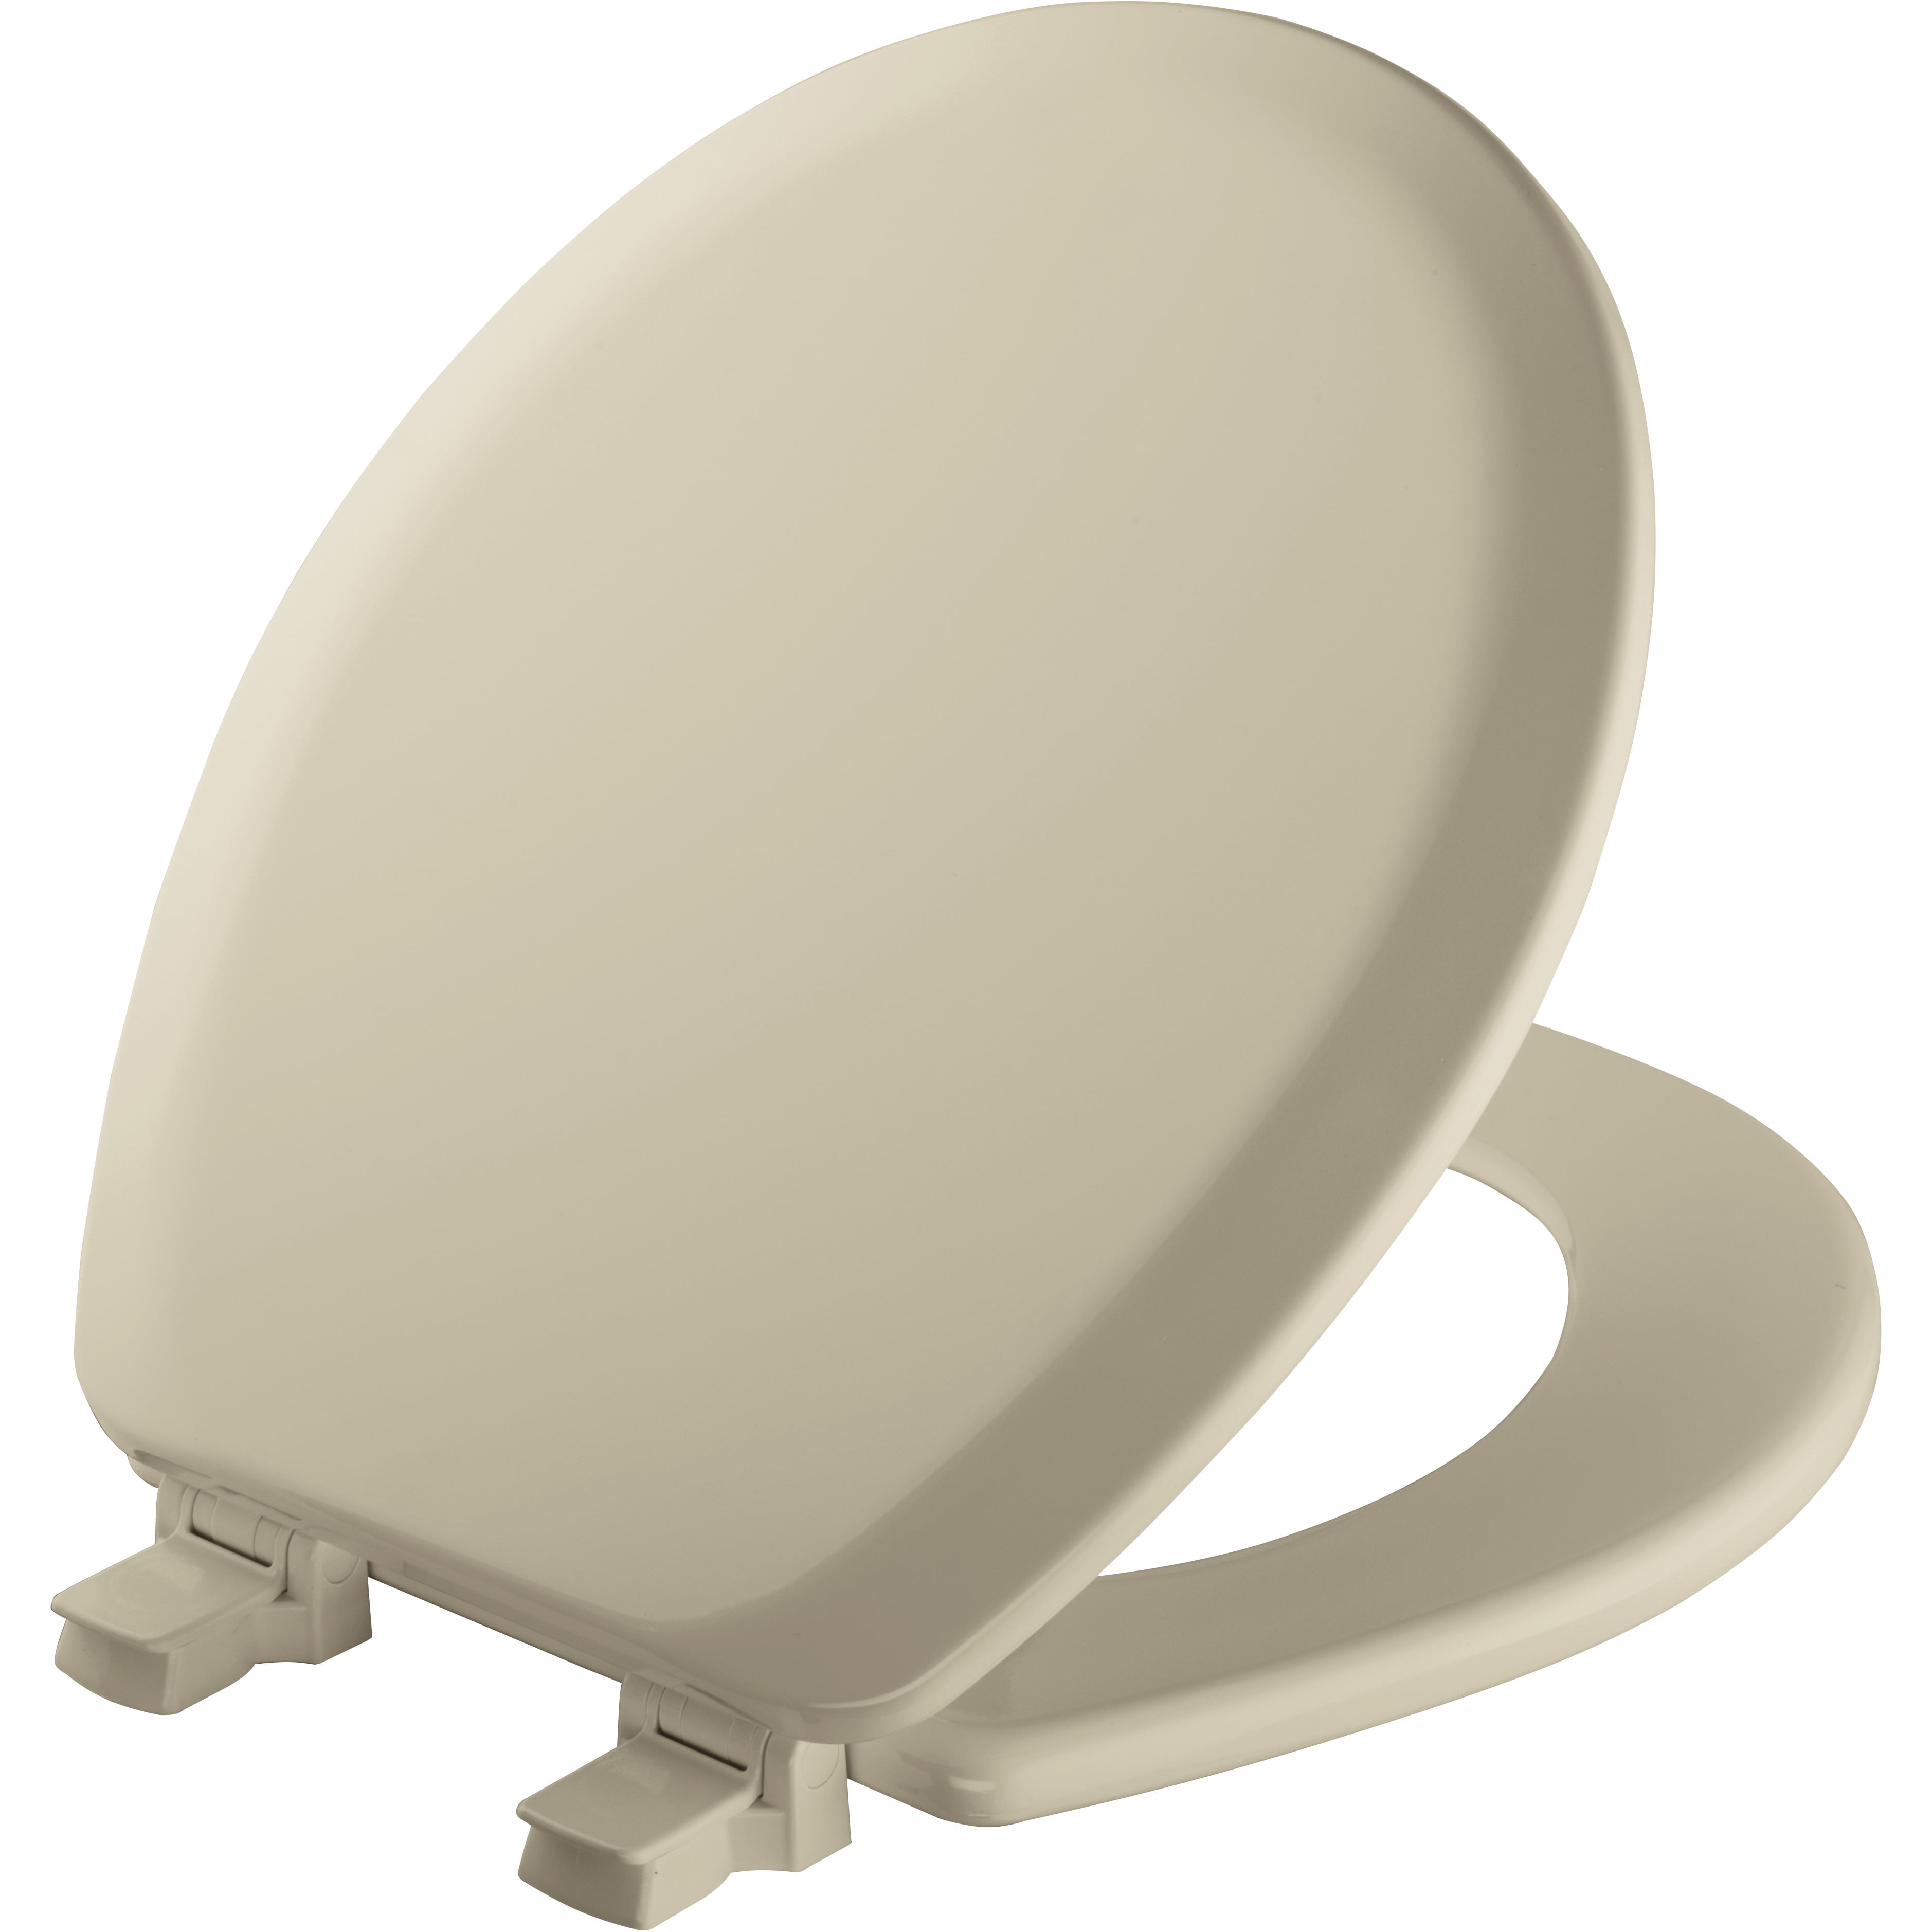 Mayfair  Commerical Fastening System  Round  White  Molded Wood  Toilet Seat 